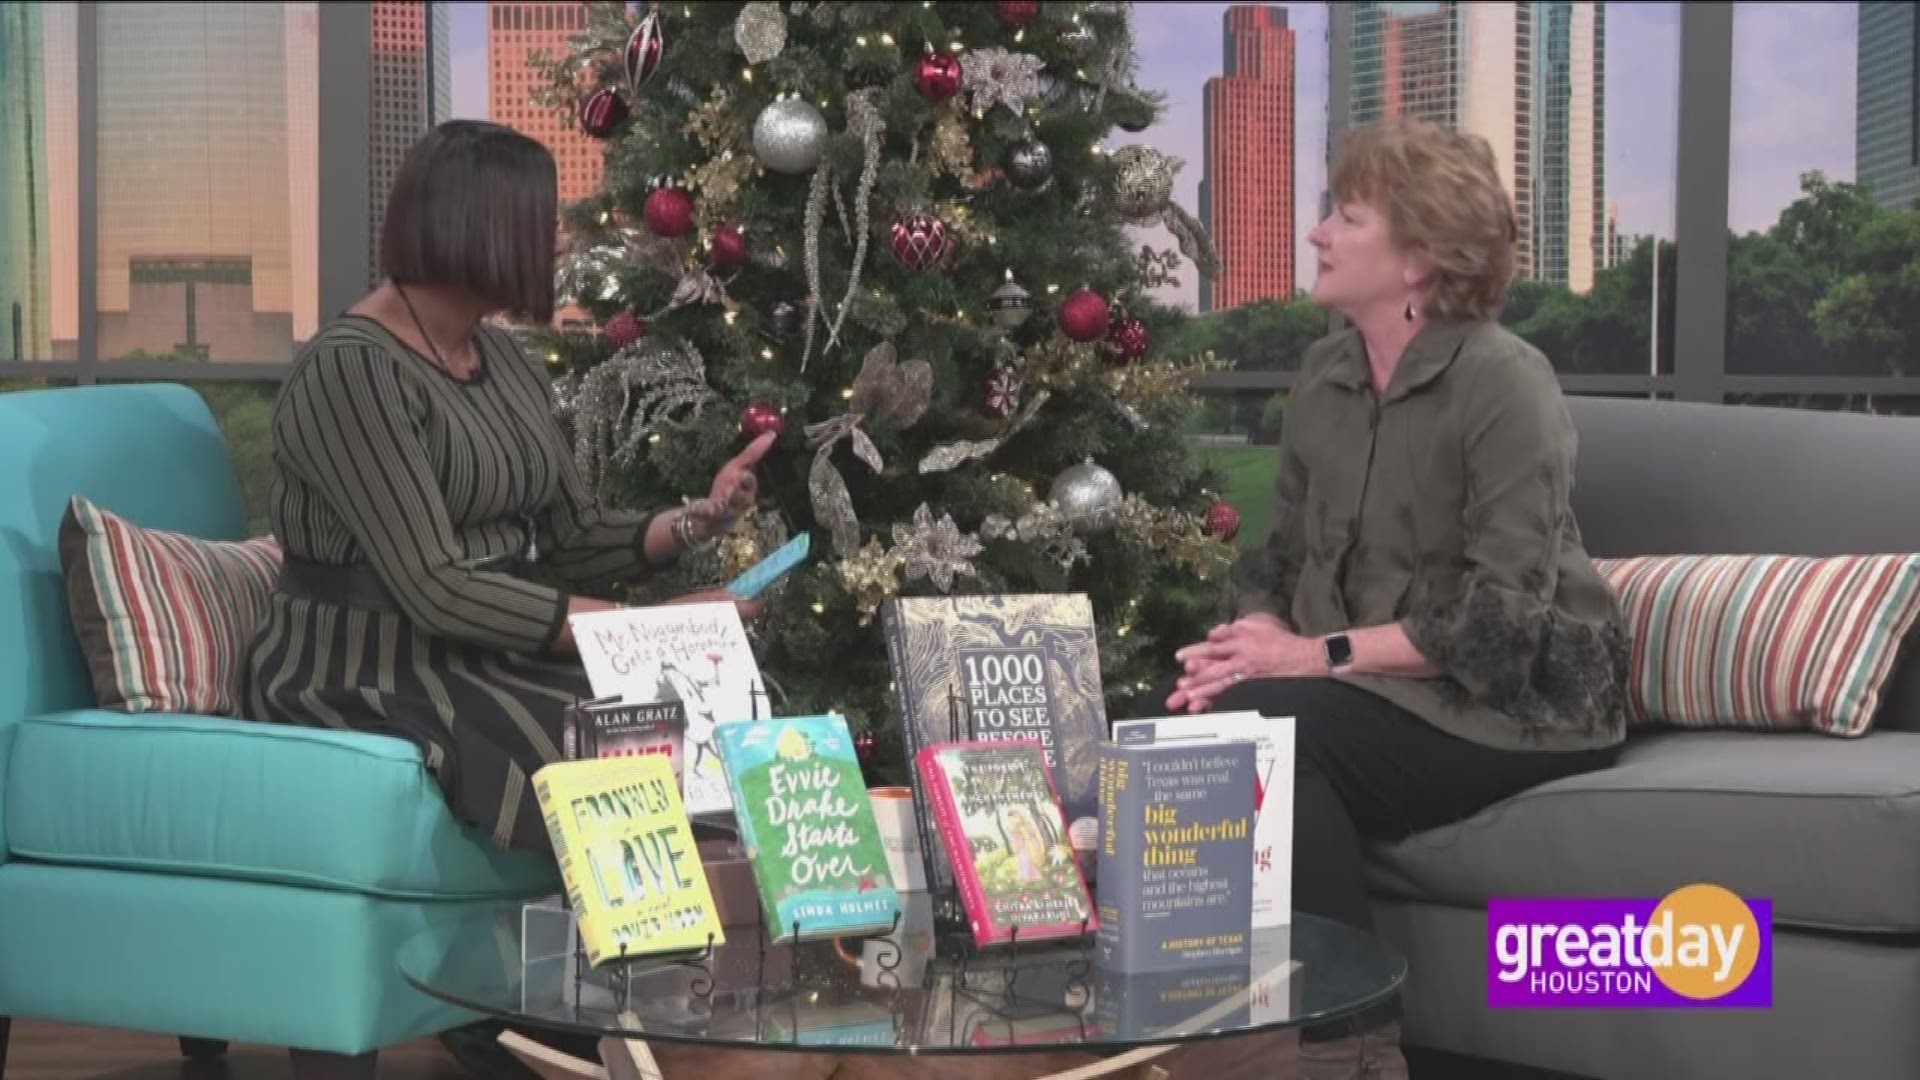 Valerie Koehler, the owner of Blue Willow Bookshop, stopped by Great Day Houston with her top book recommendations.